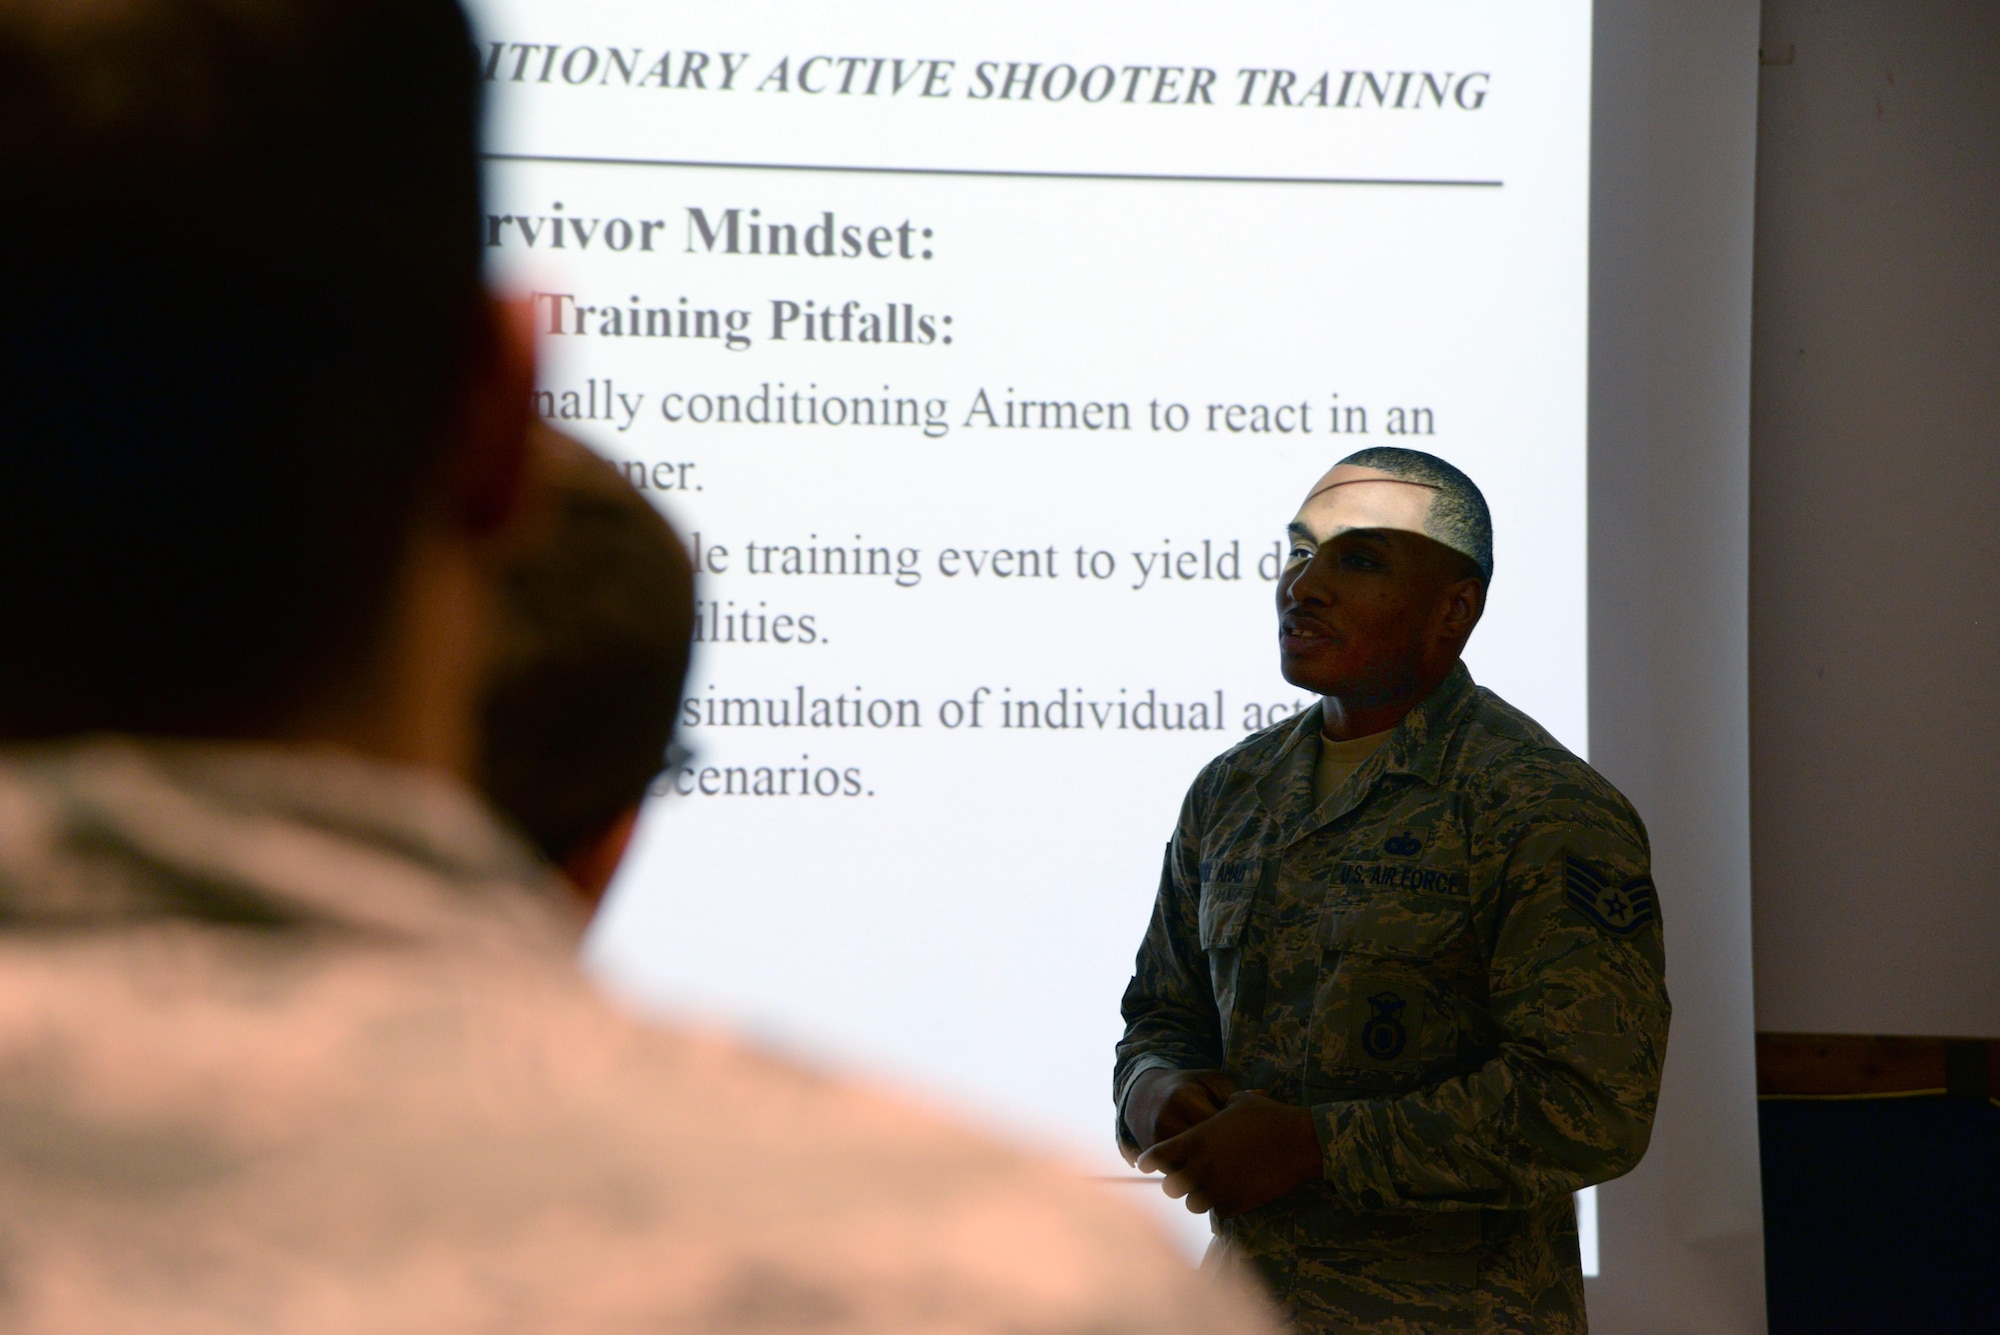 Staff Sgt. Karriem Abdulahad, 86th Security Forces Squadron training instructor, teaches the Expeditionary Active Shooter Training course information to his students at Ramstein Air Base, Germany, Dec. 15, 2016. The EAST course teaches Airmen preparing to deploy how to handle an active shooter situation in a practical manner that can be used day-to-day. (U.S. Air Force photo by Airman 1st Class D. Blake Browning)